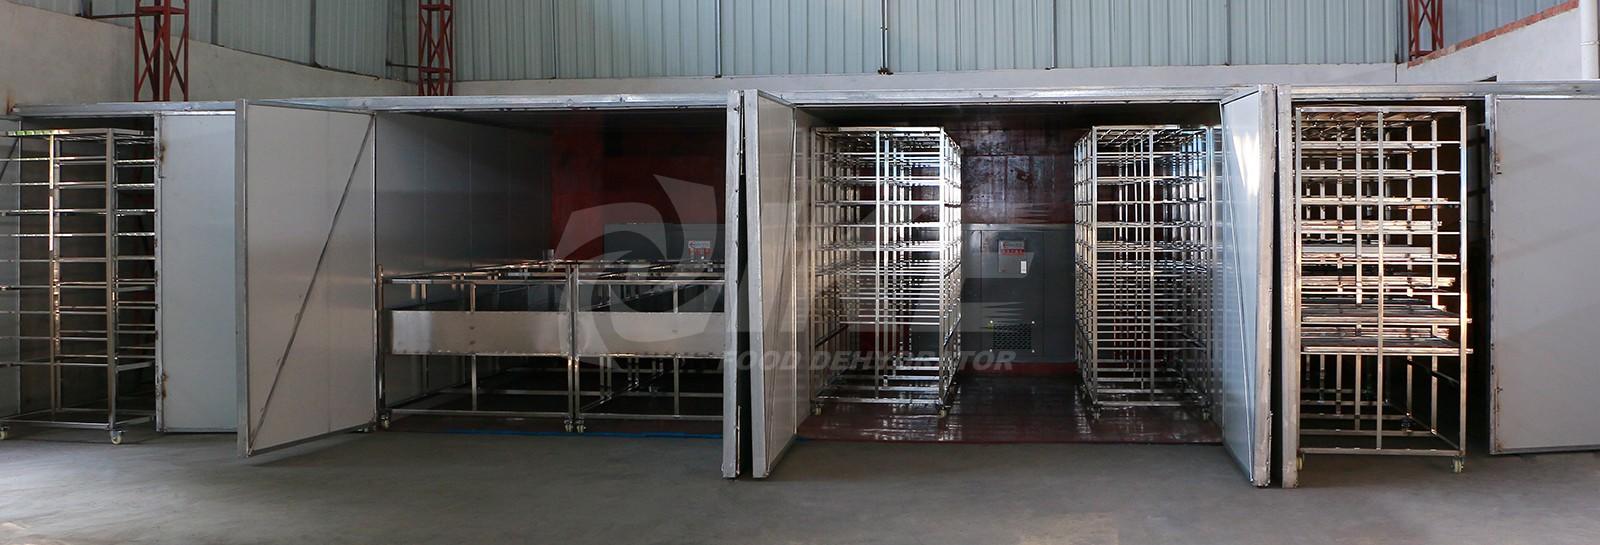 IKE-Professional Commercial Dehydrator Fruit And Vegetable Dryer Machine Supplier